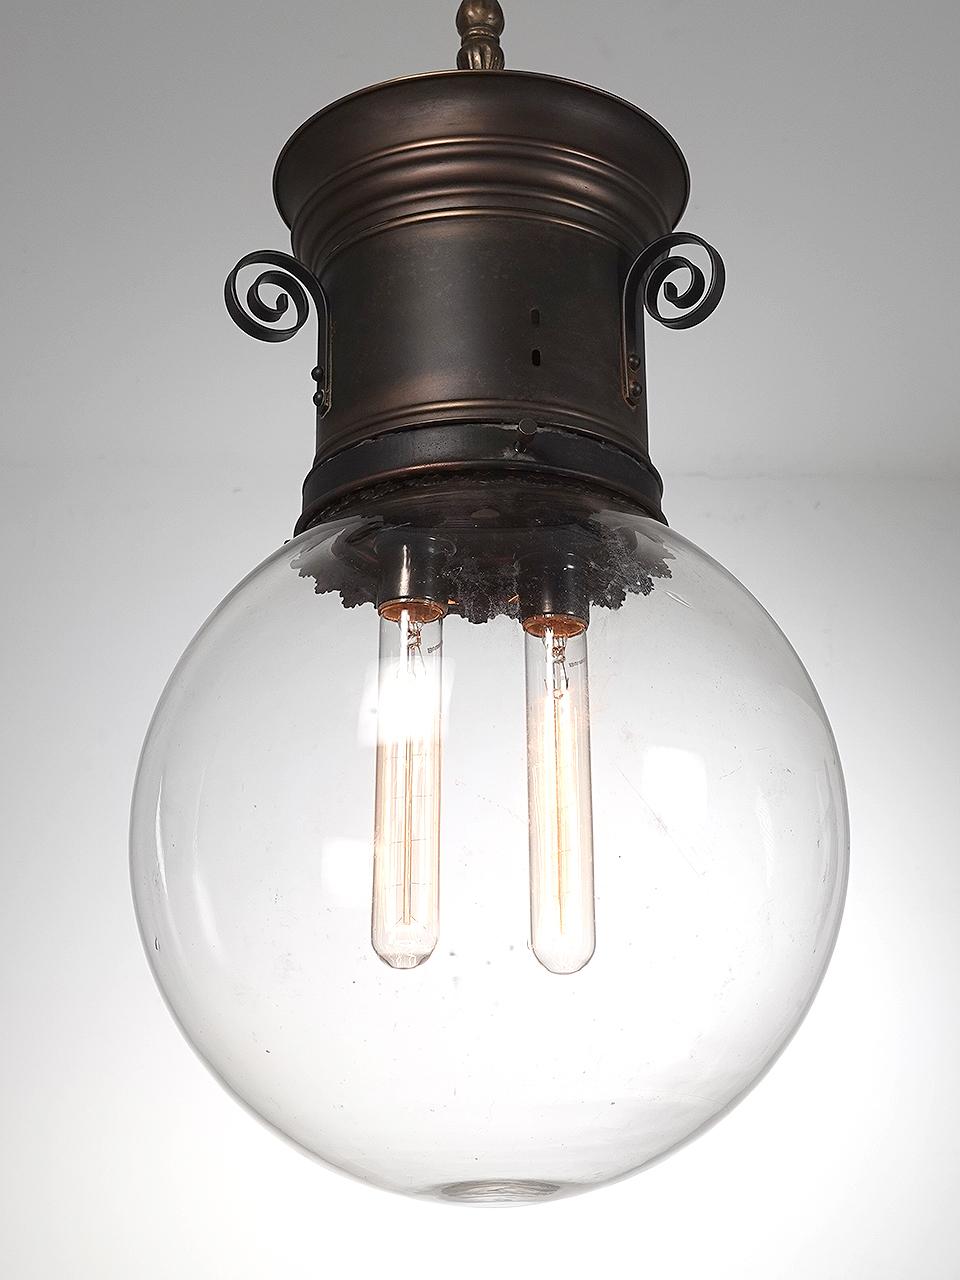 This is a simple and elegant pendent that started life as a Humphrey gas lamp. It is no reconfigured to electric using two standard E26 bulbs. The hand blown clear globe is a large one with a 12 inch diameter.